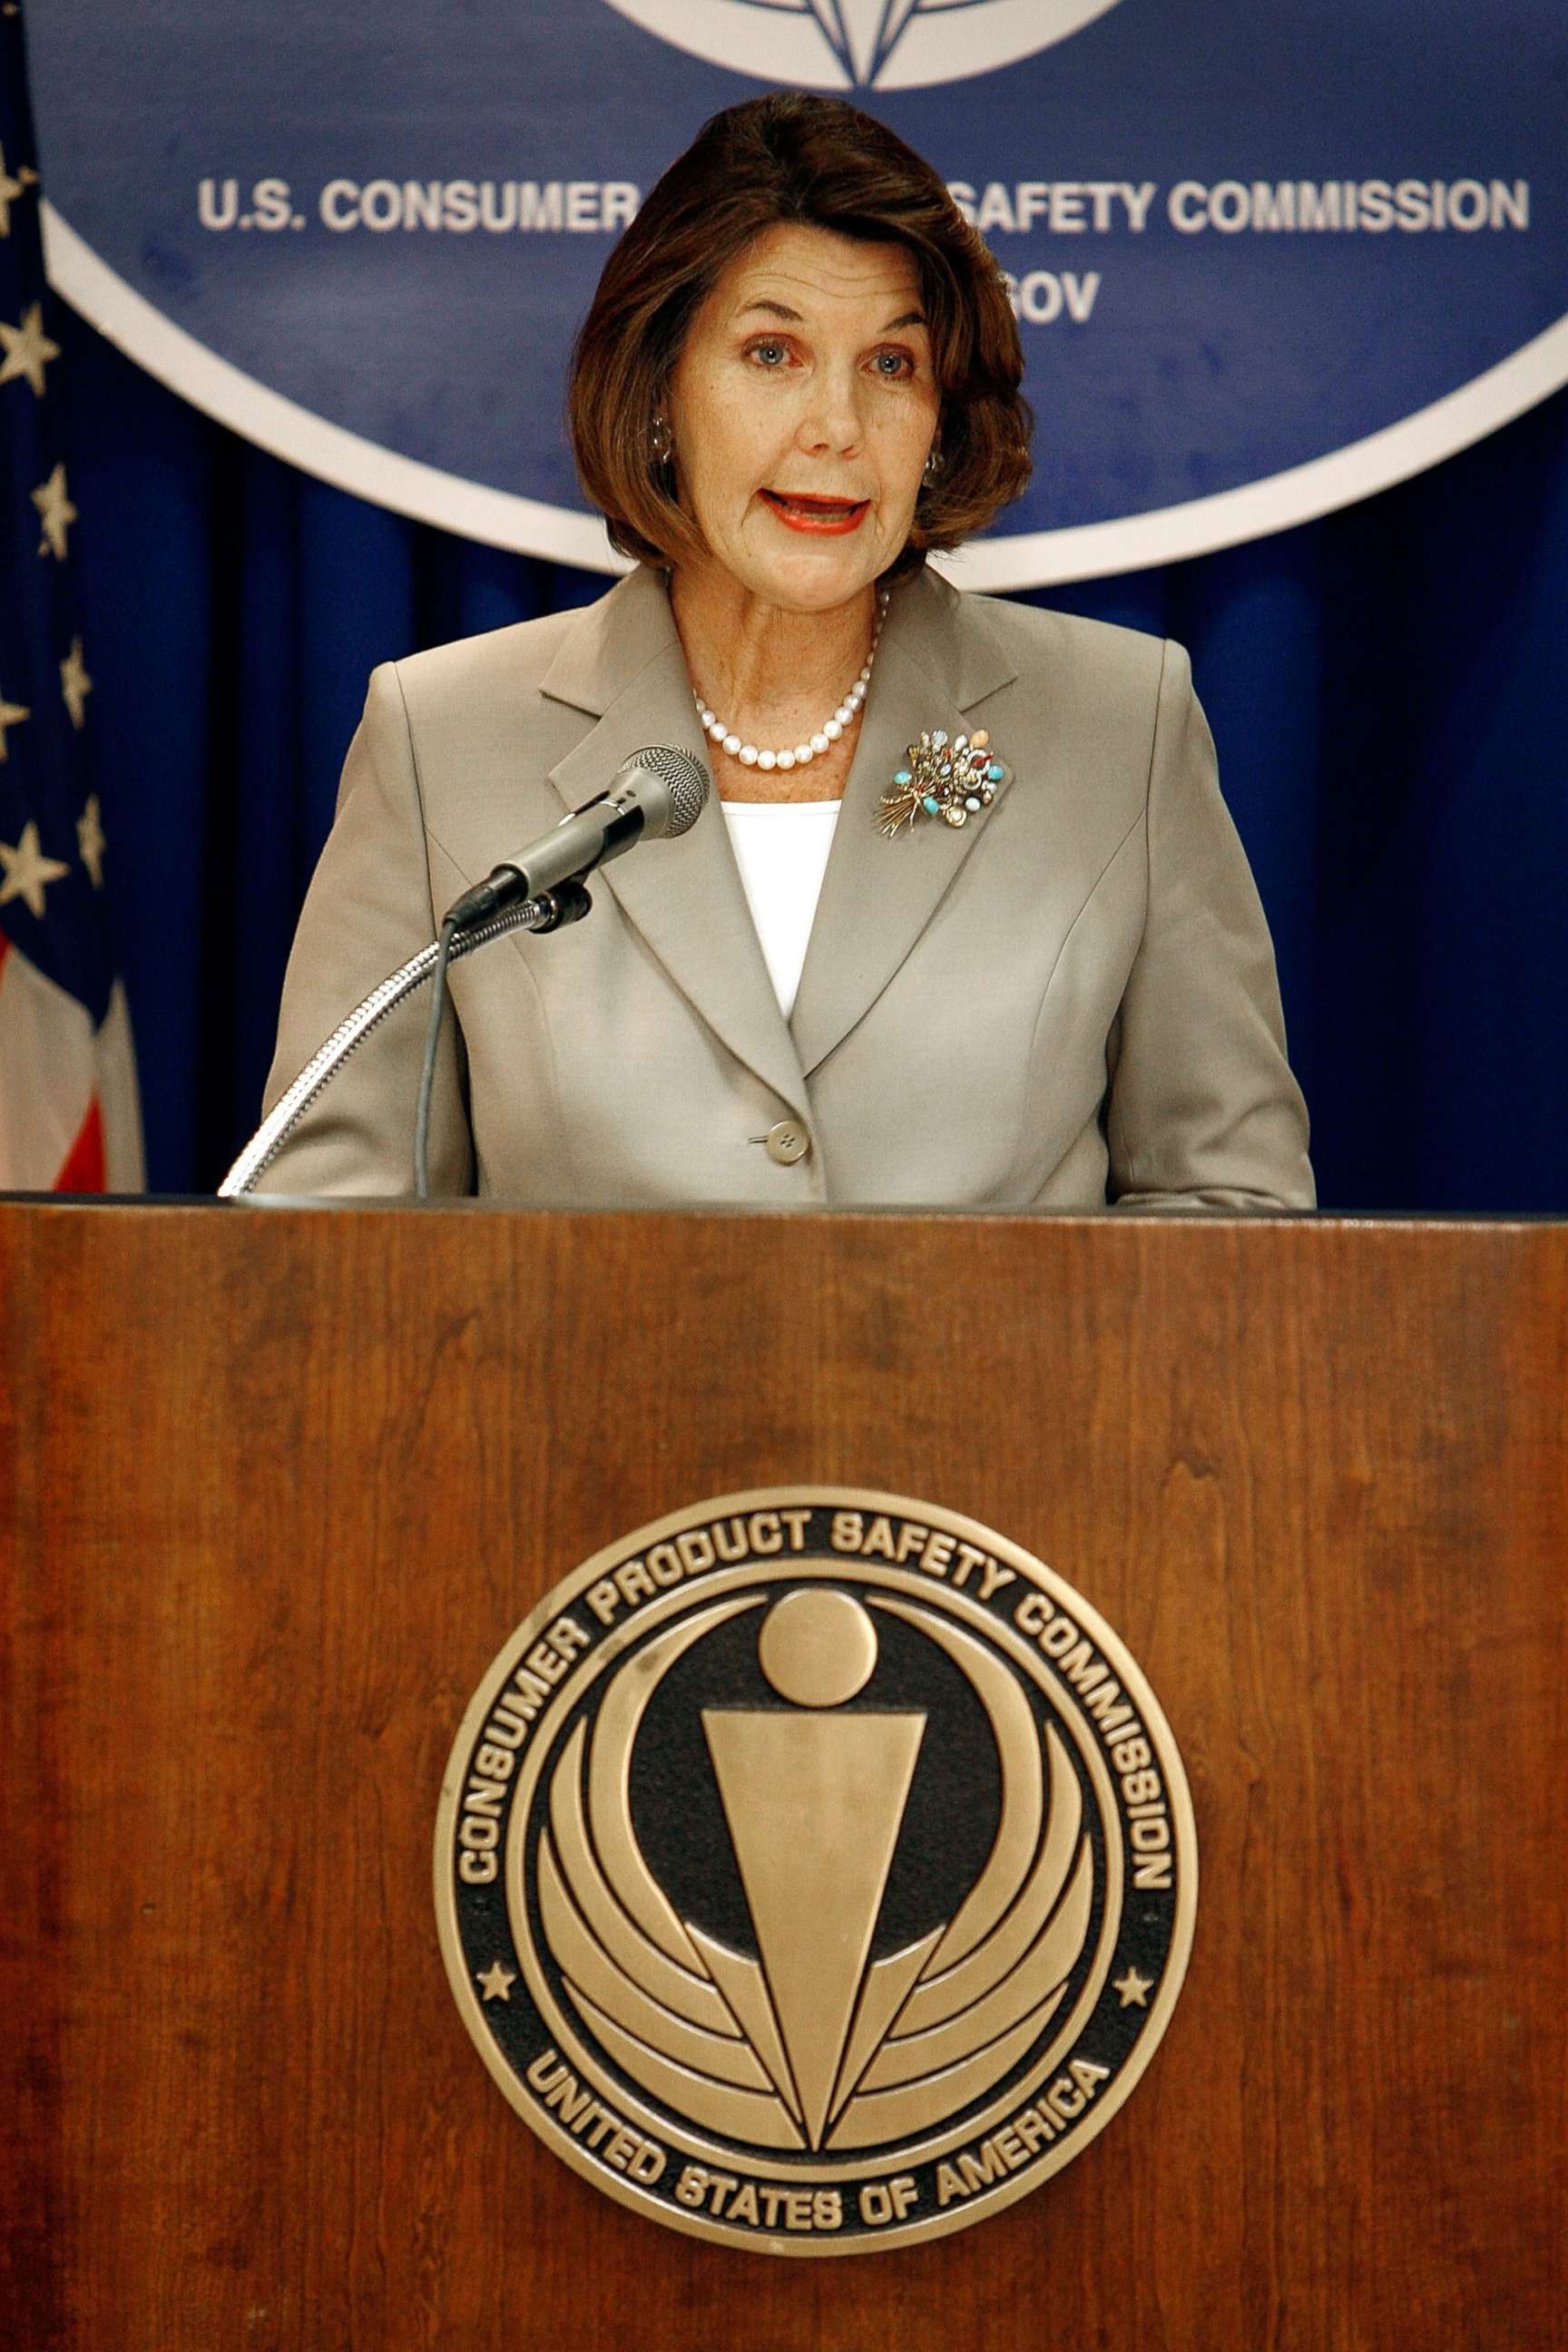 PHOTO: The logo for the U.S. Consumer Product Safety Commission marks a podium during a press conference in Bethesda, Md., Aug. 14, 2007.